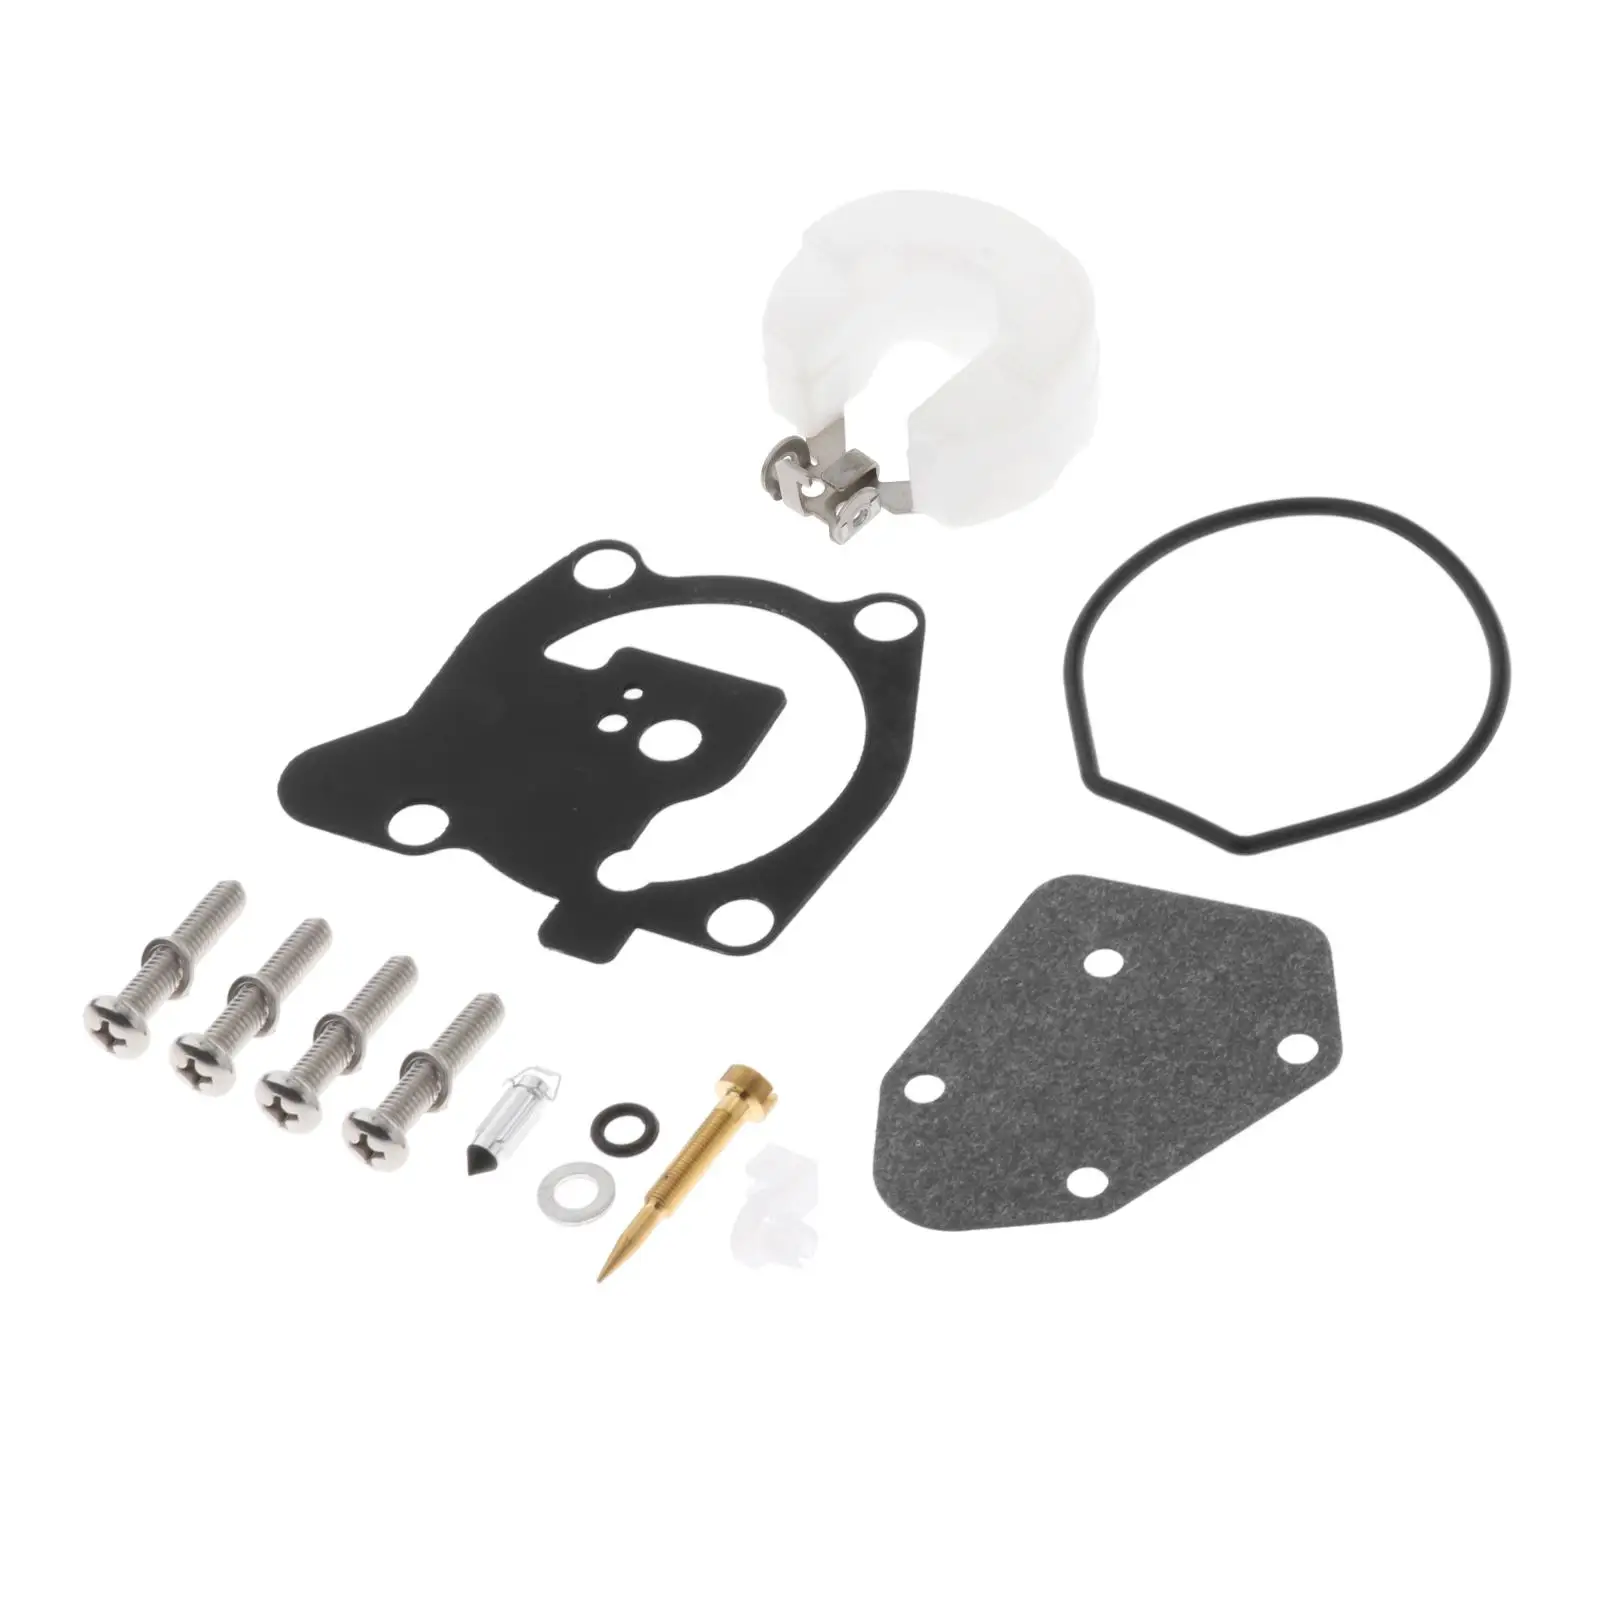 Boat Carburetor Carb Repair Kit Set 66T-W0093-00-00 66TW00930000 for Yamaha Outboard 40HP engine X models E40X